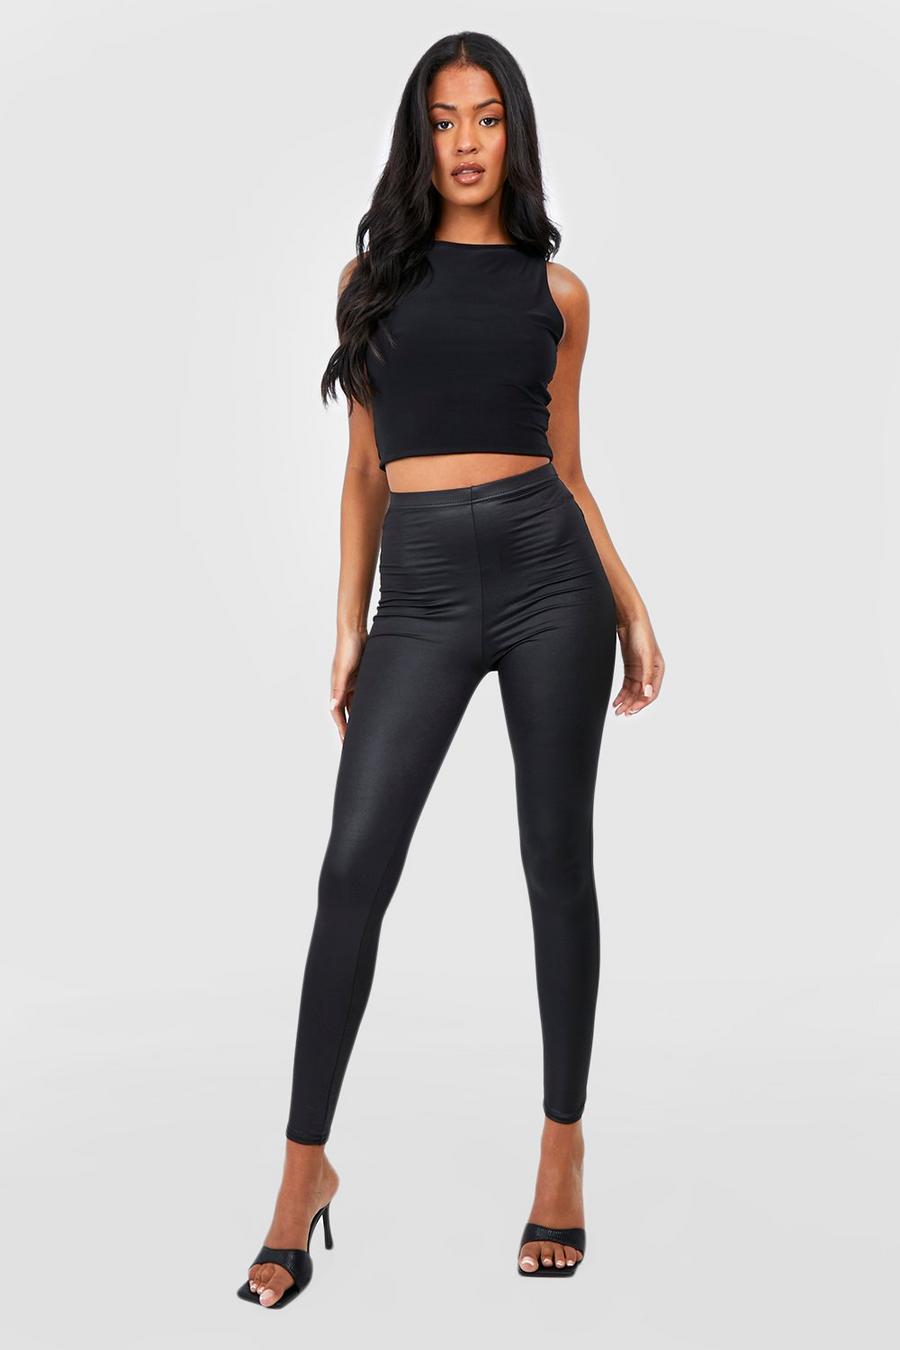 Black Tall Faux Leather High Waisted Leggings